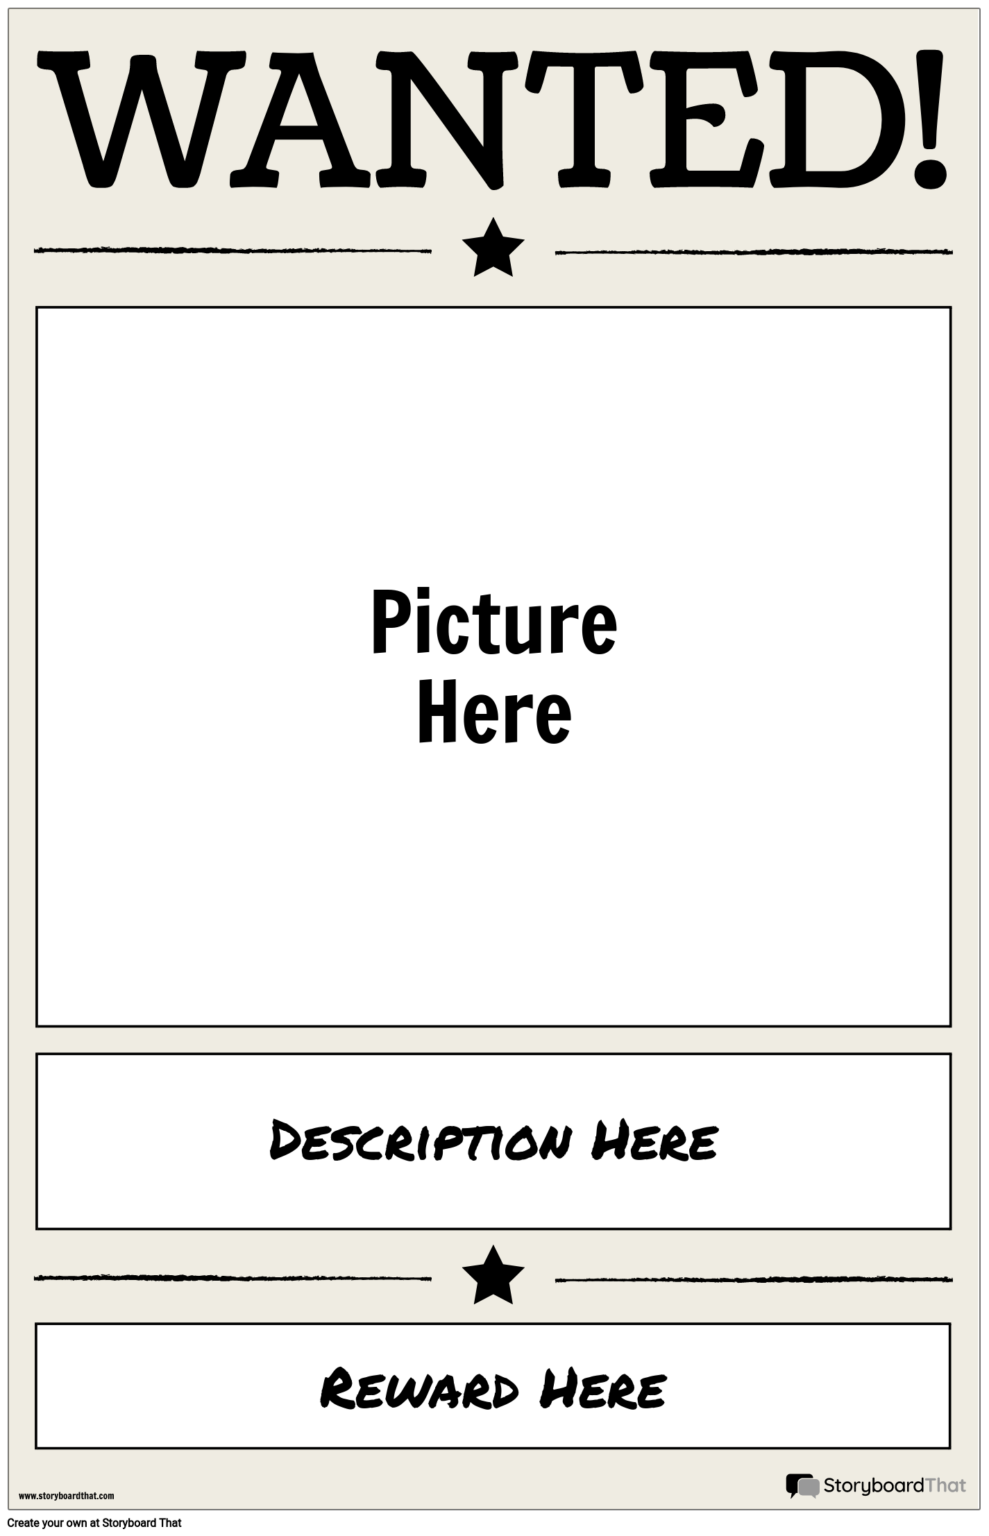 Wanted Poster Template For Students Create Wanted Posters Storyboard ...